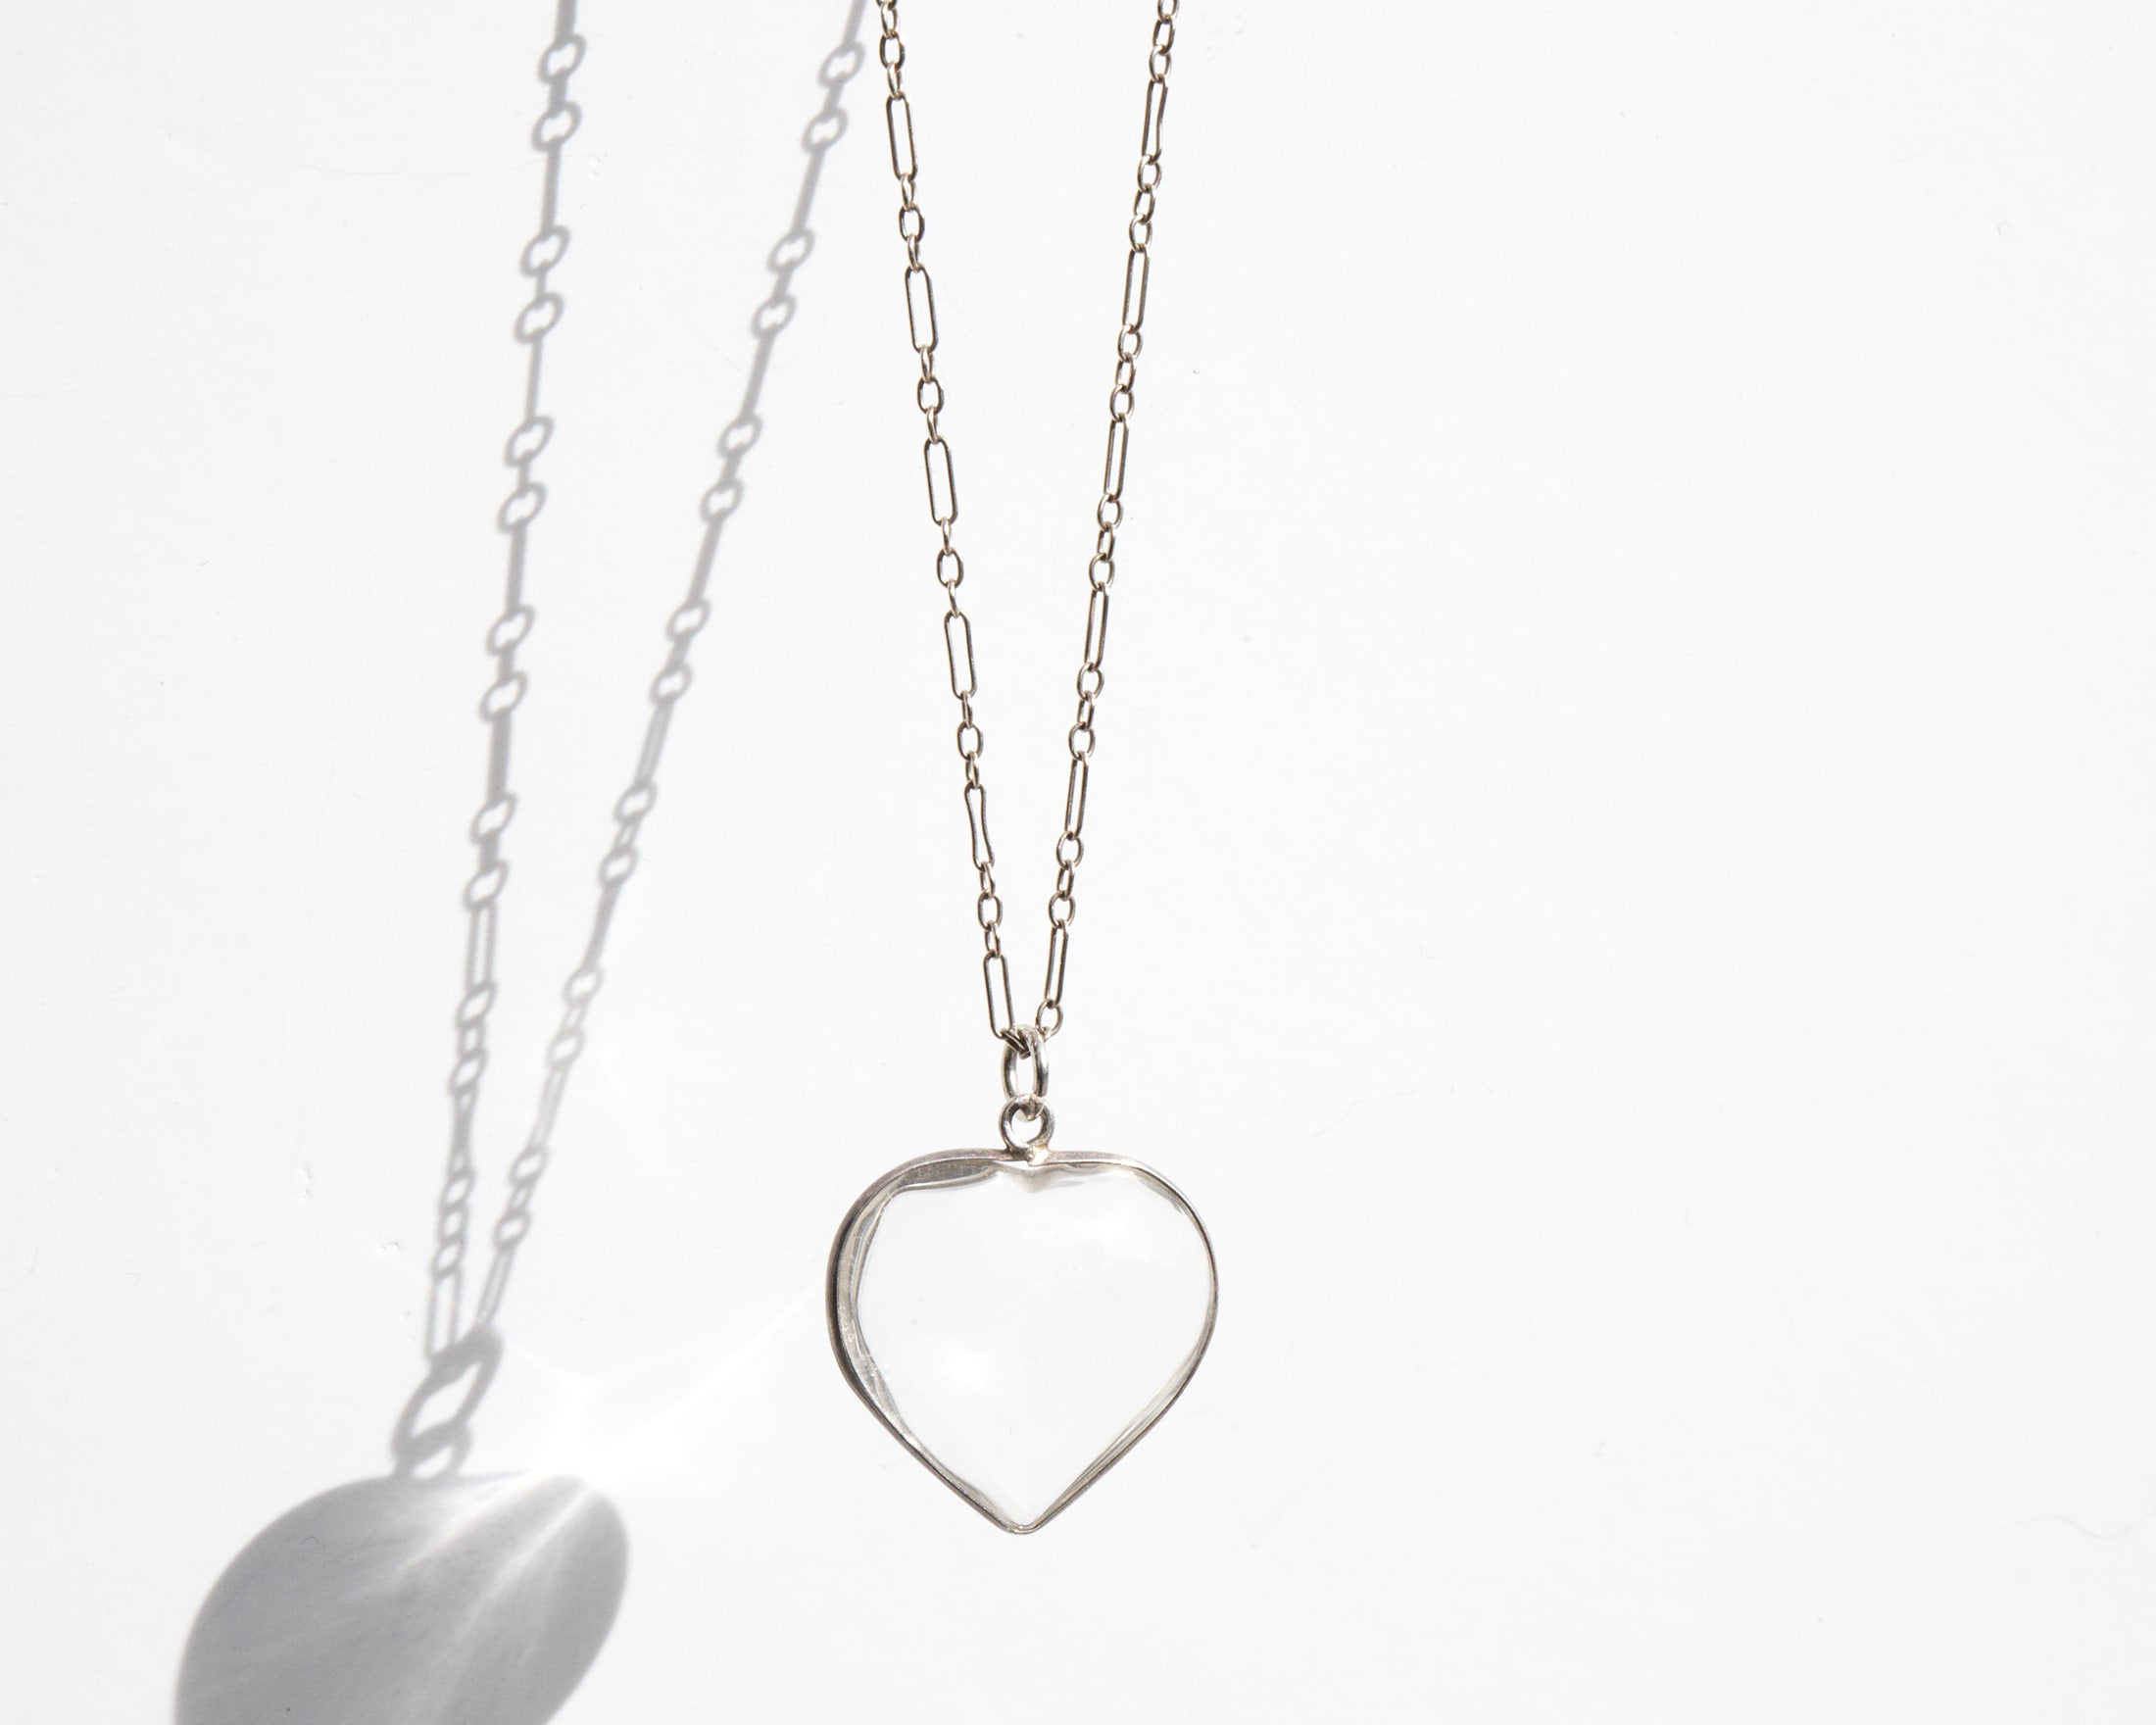 Pools of Light Heart Necklace